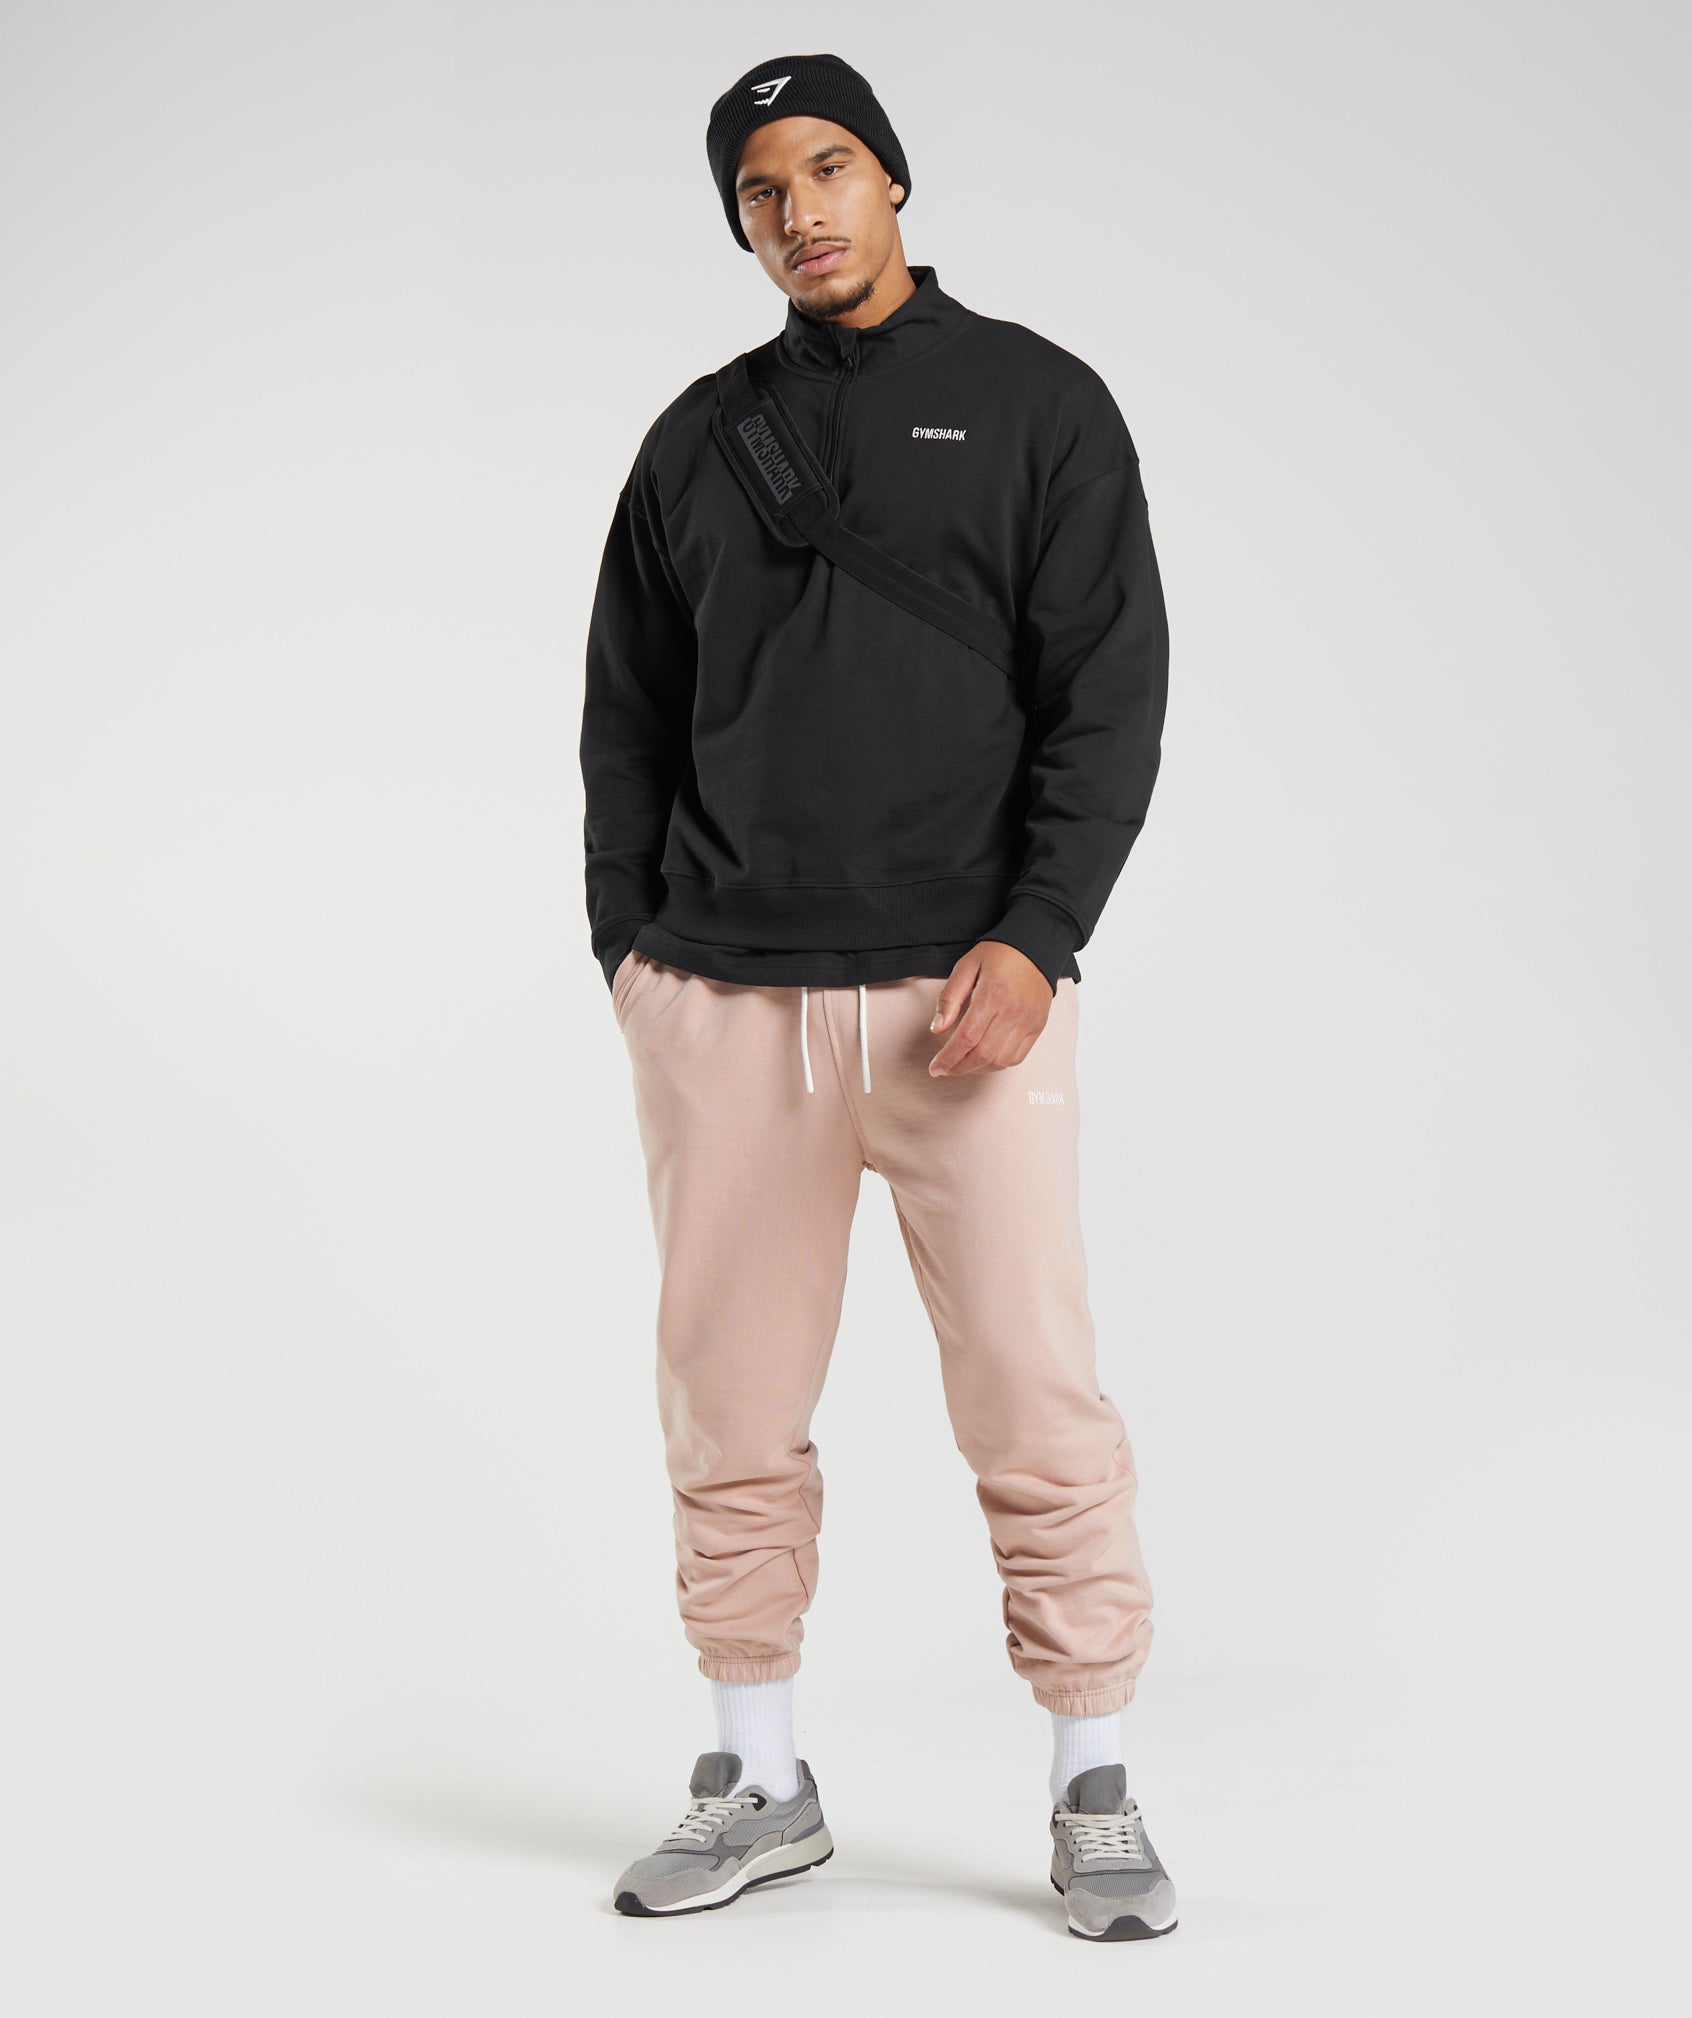 Rest Day Sweats Joggers in Dusty Taupe - view 4